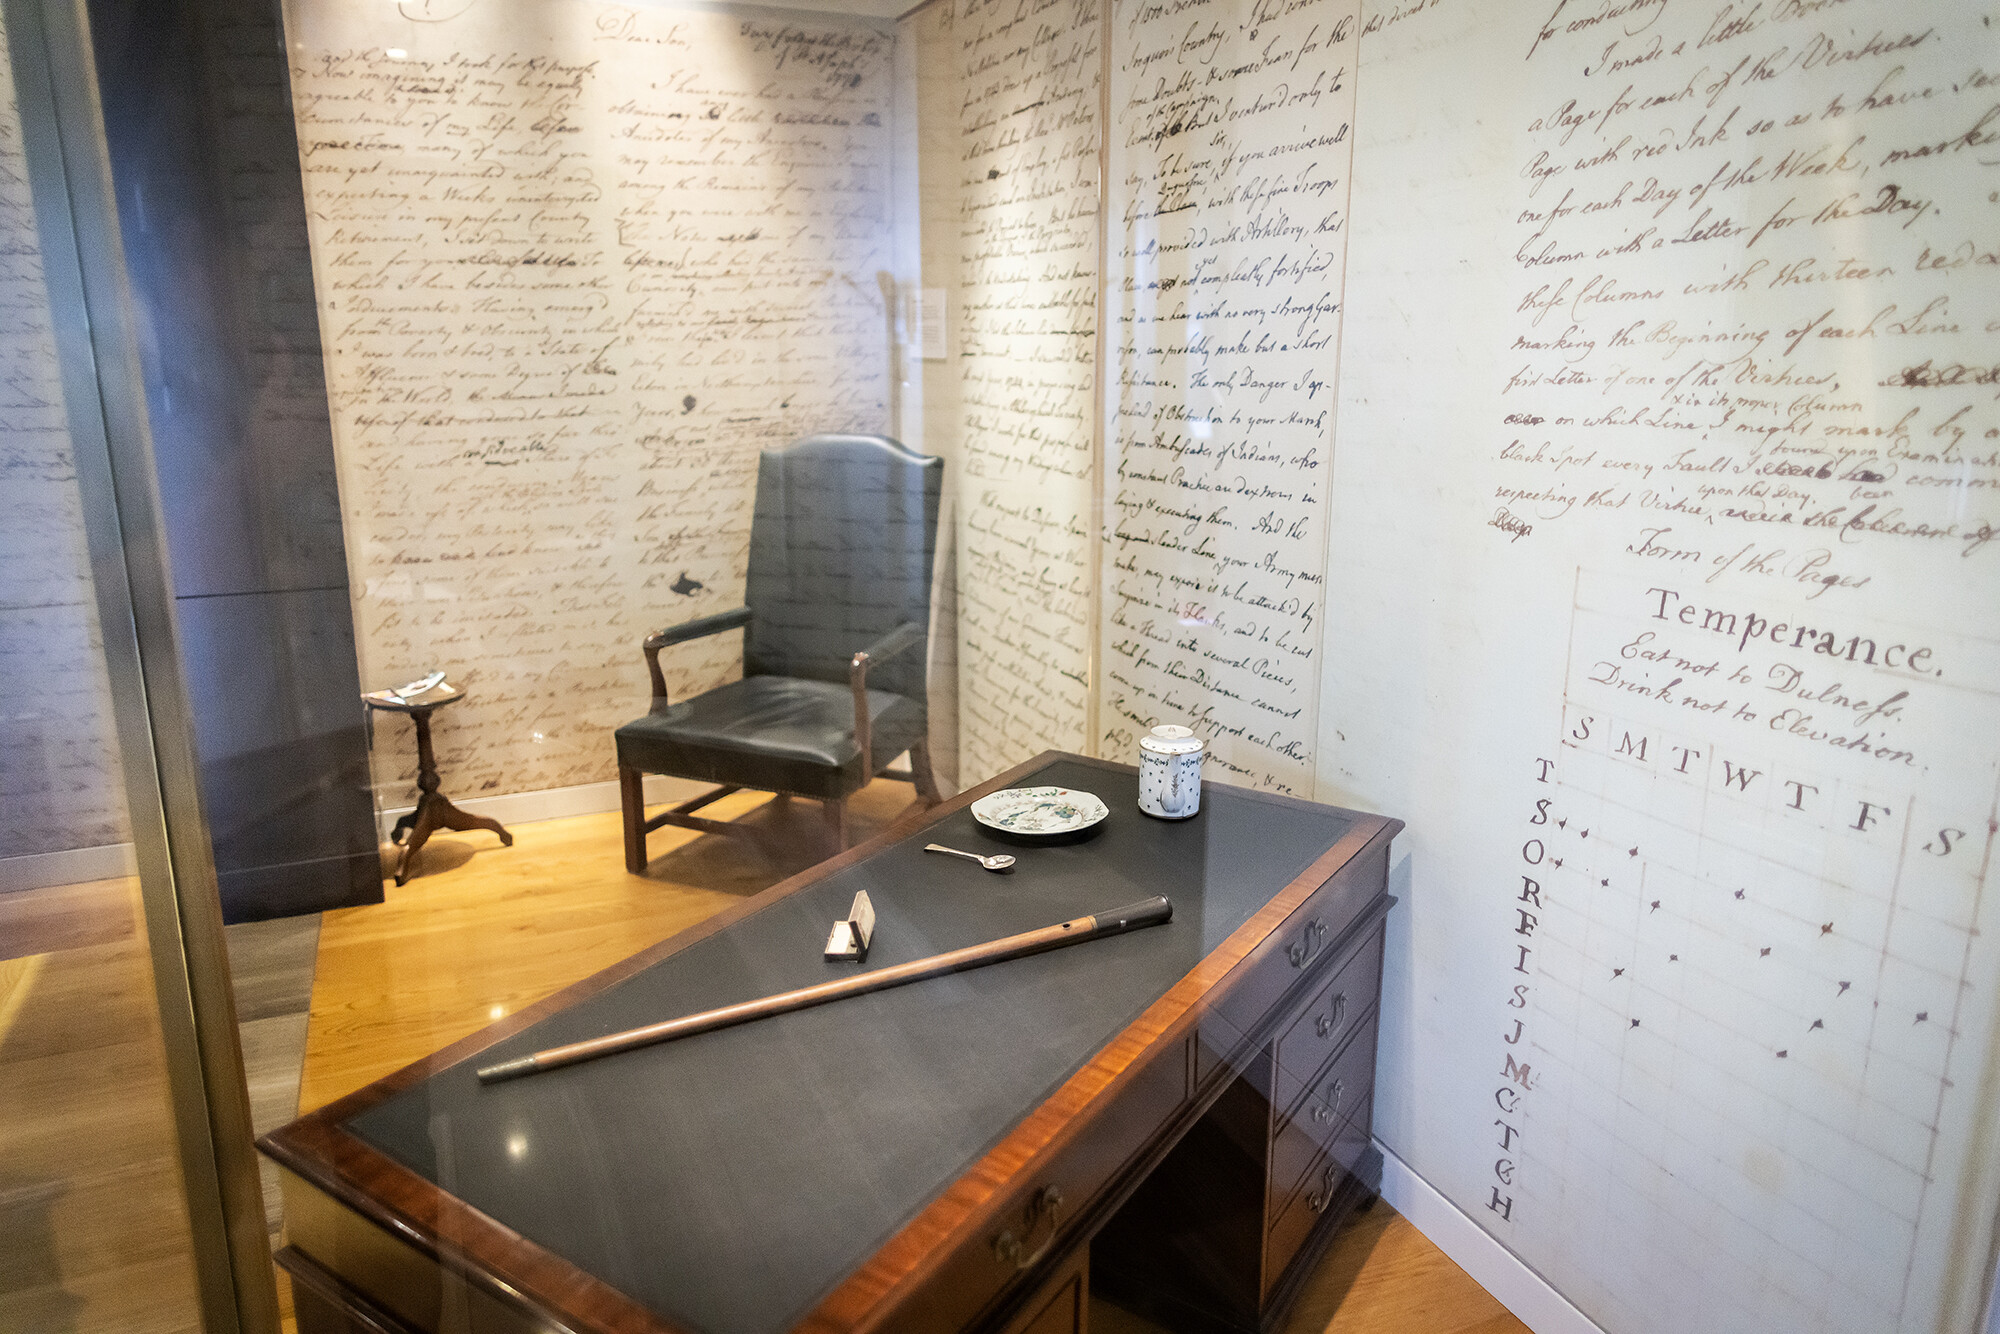 A staged room of Ben Franklin’s office.